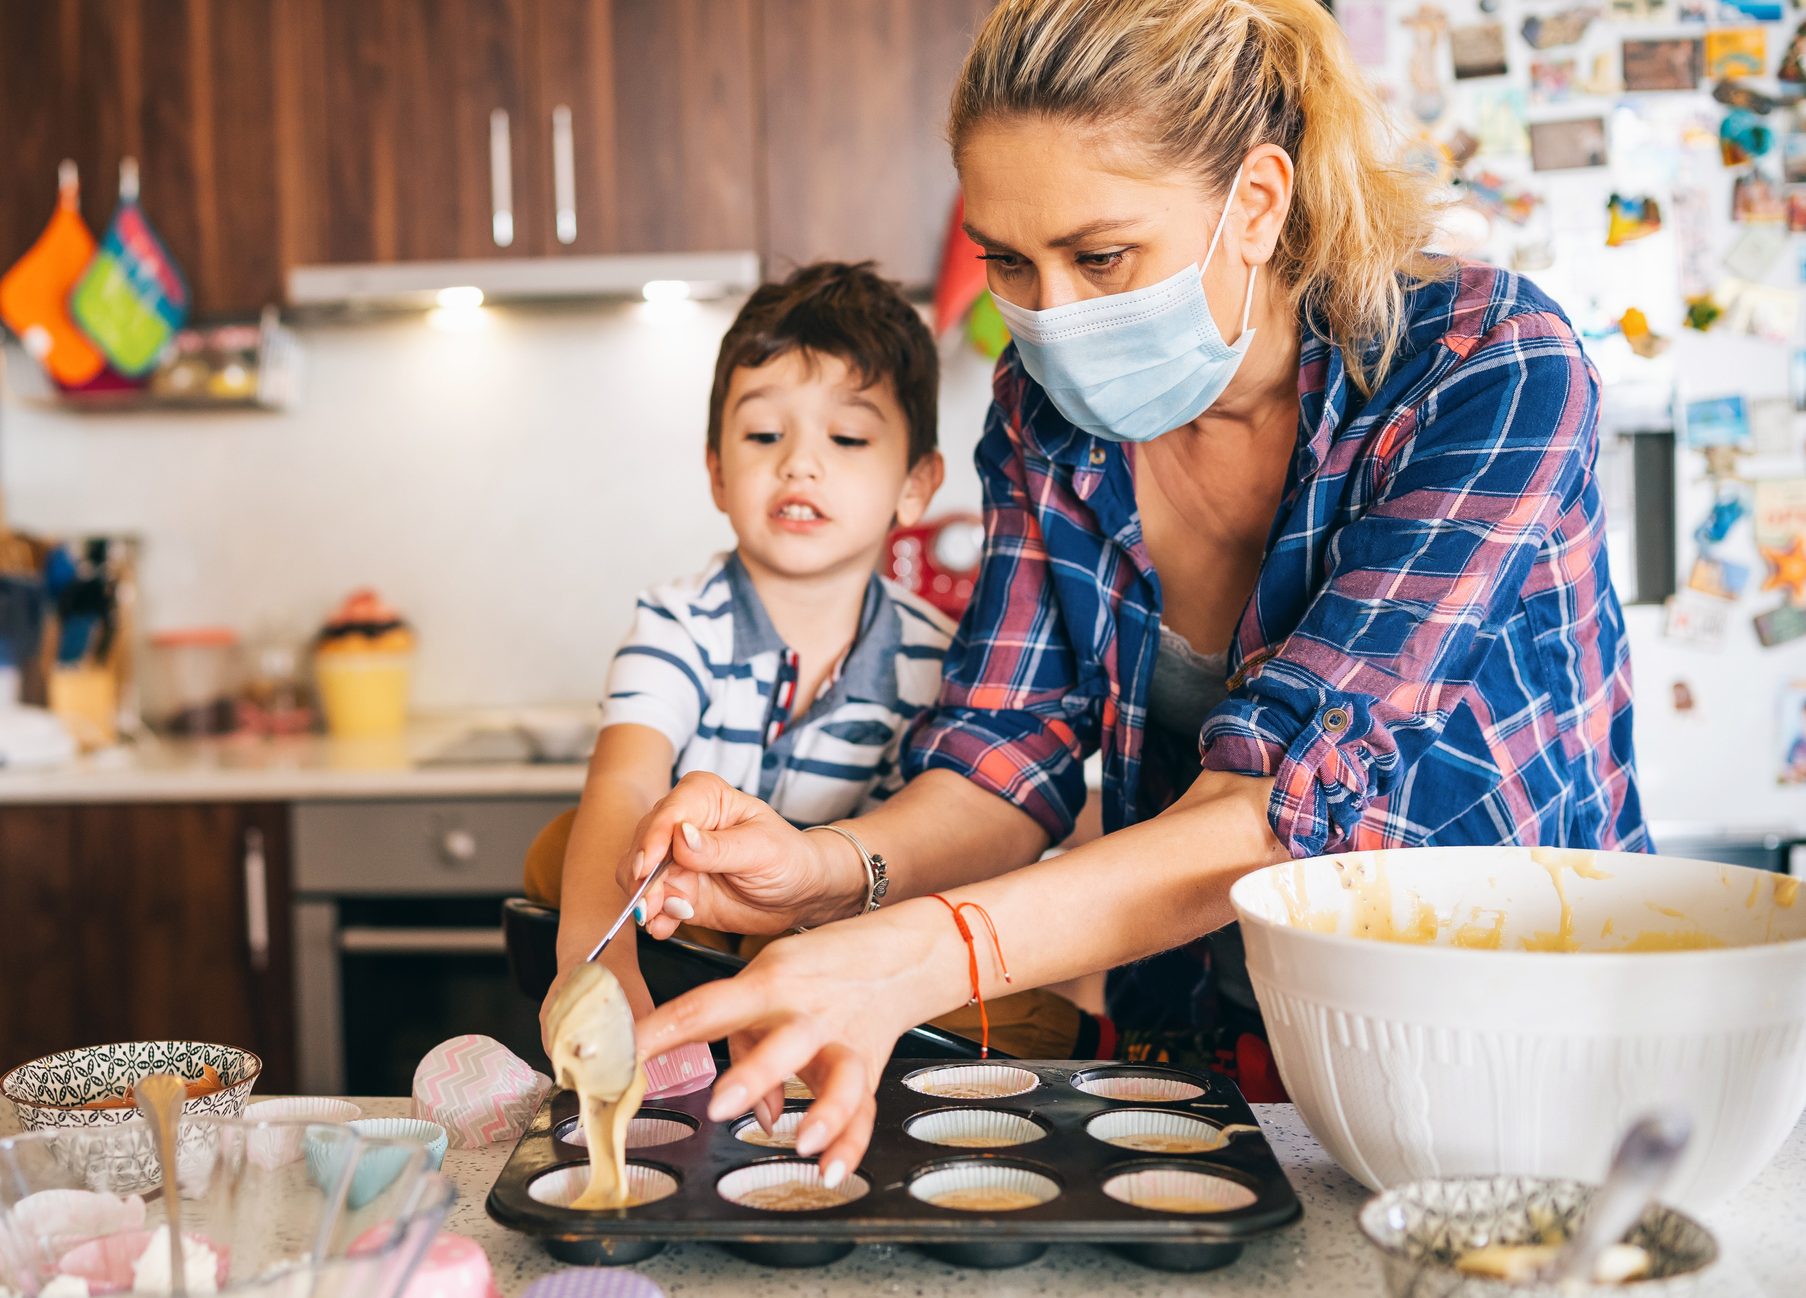 FUNIBER-mother-using-protective-mask-making-delicious-cupcakes-with-her-children-isolation-at-home-for-virus